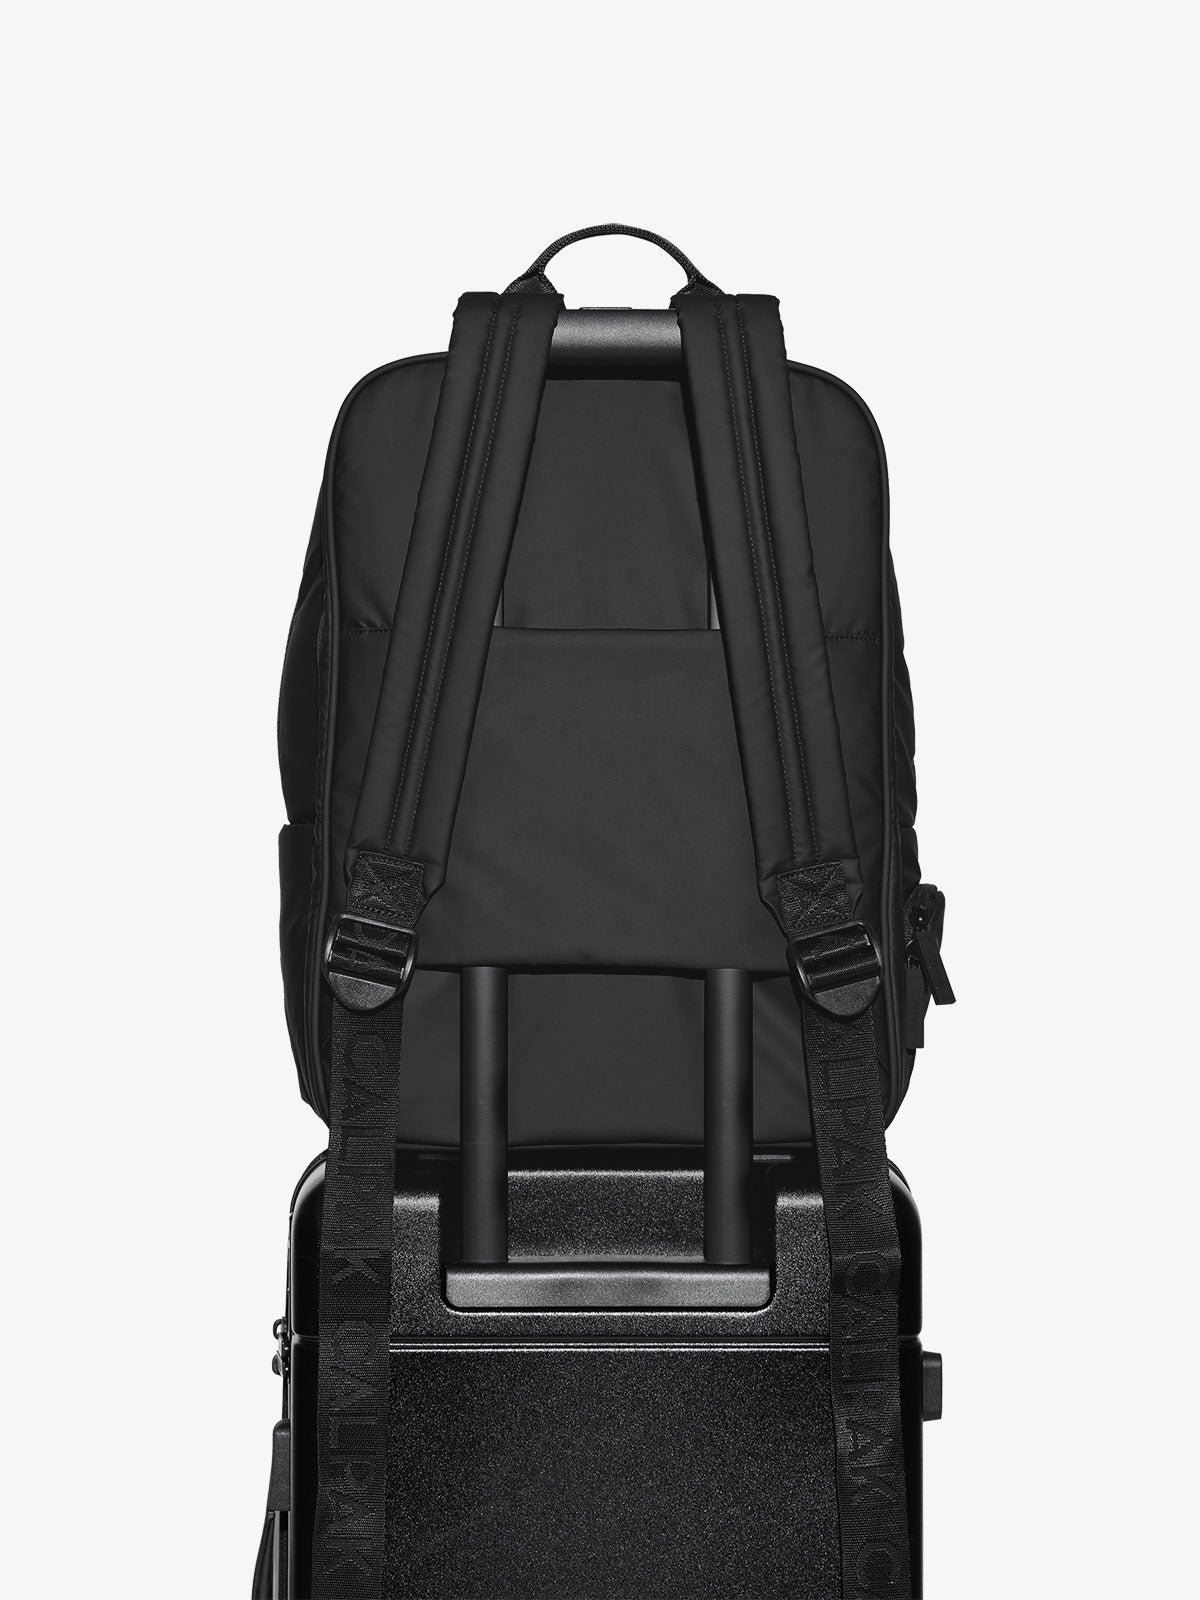 CALPAK laptop backpack for 17 inch laptop with adjustable shoulder straps and trolley pass through with hidden pocket in matte black